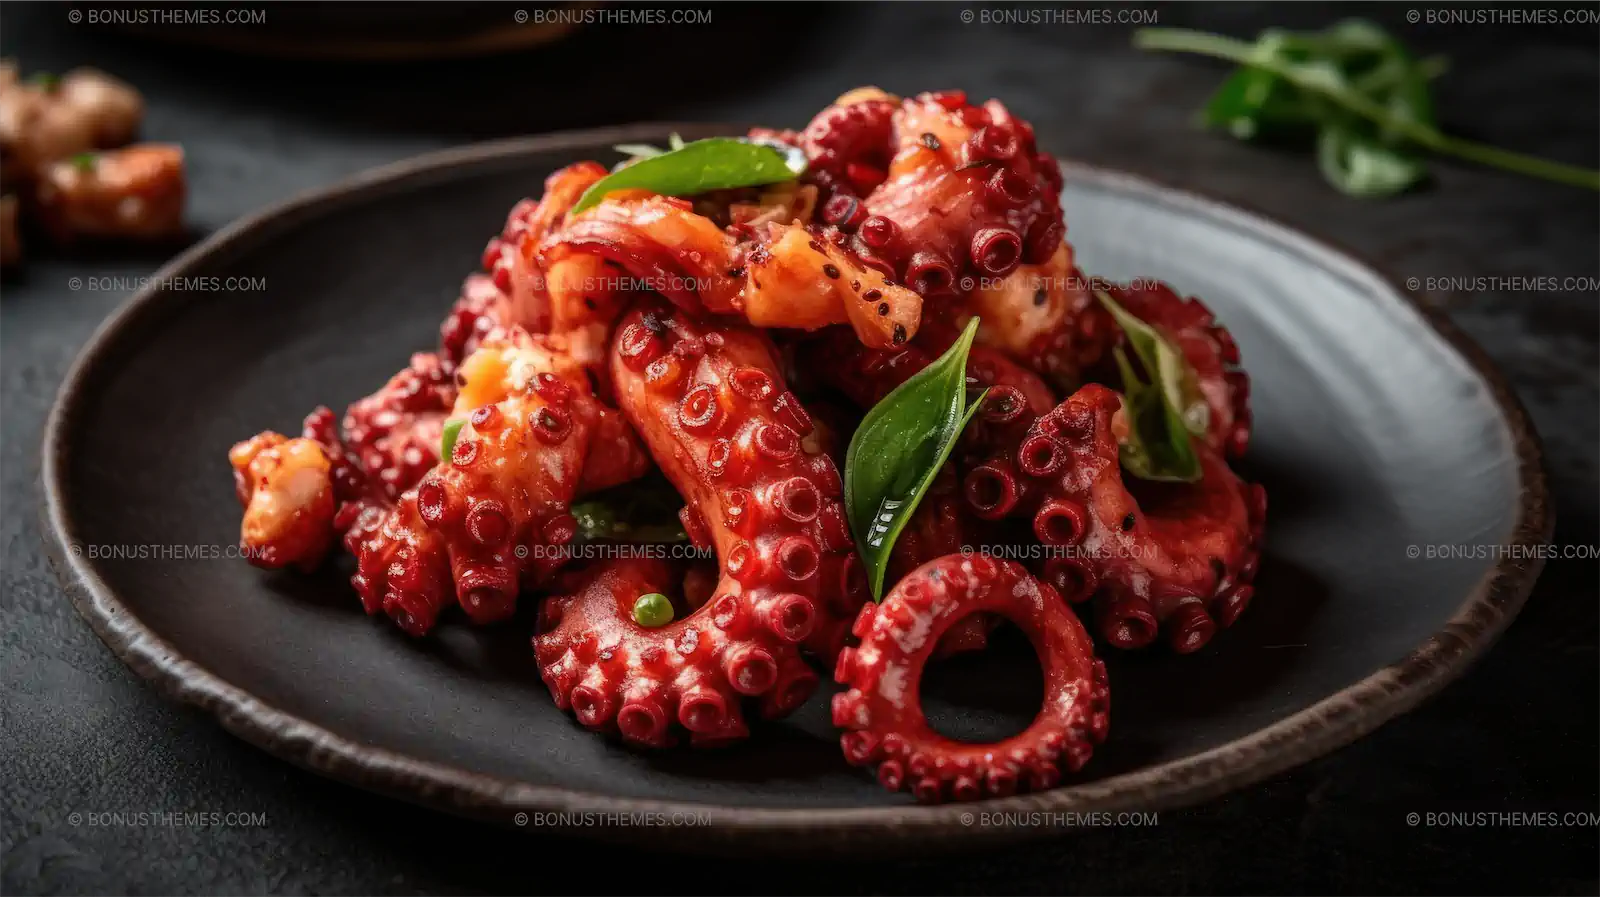 Octopus with tentacles in a grey plate